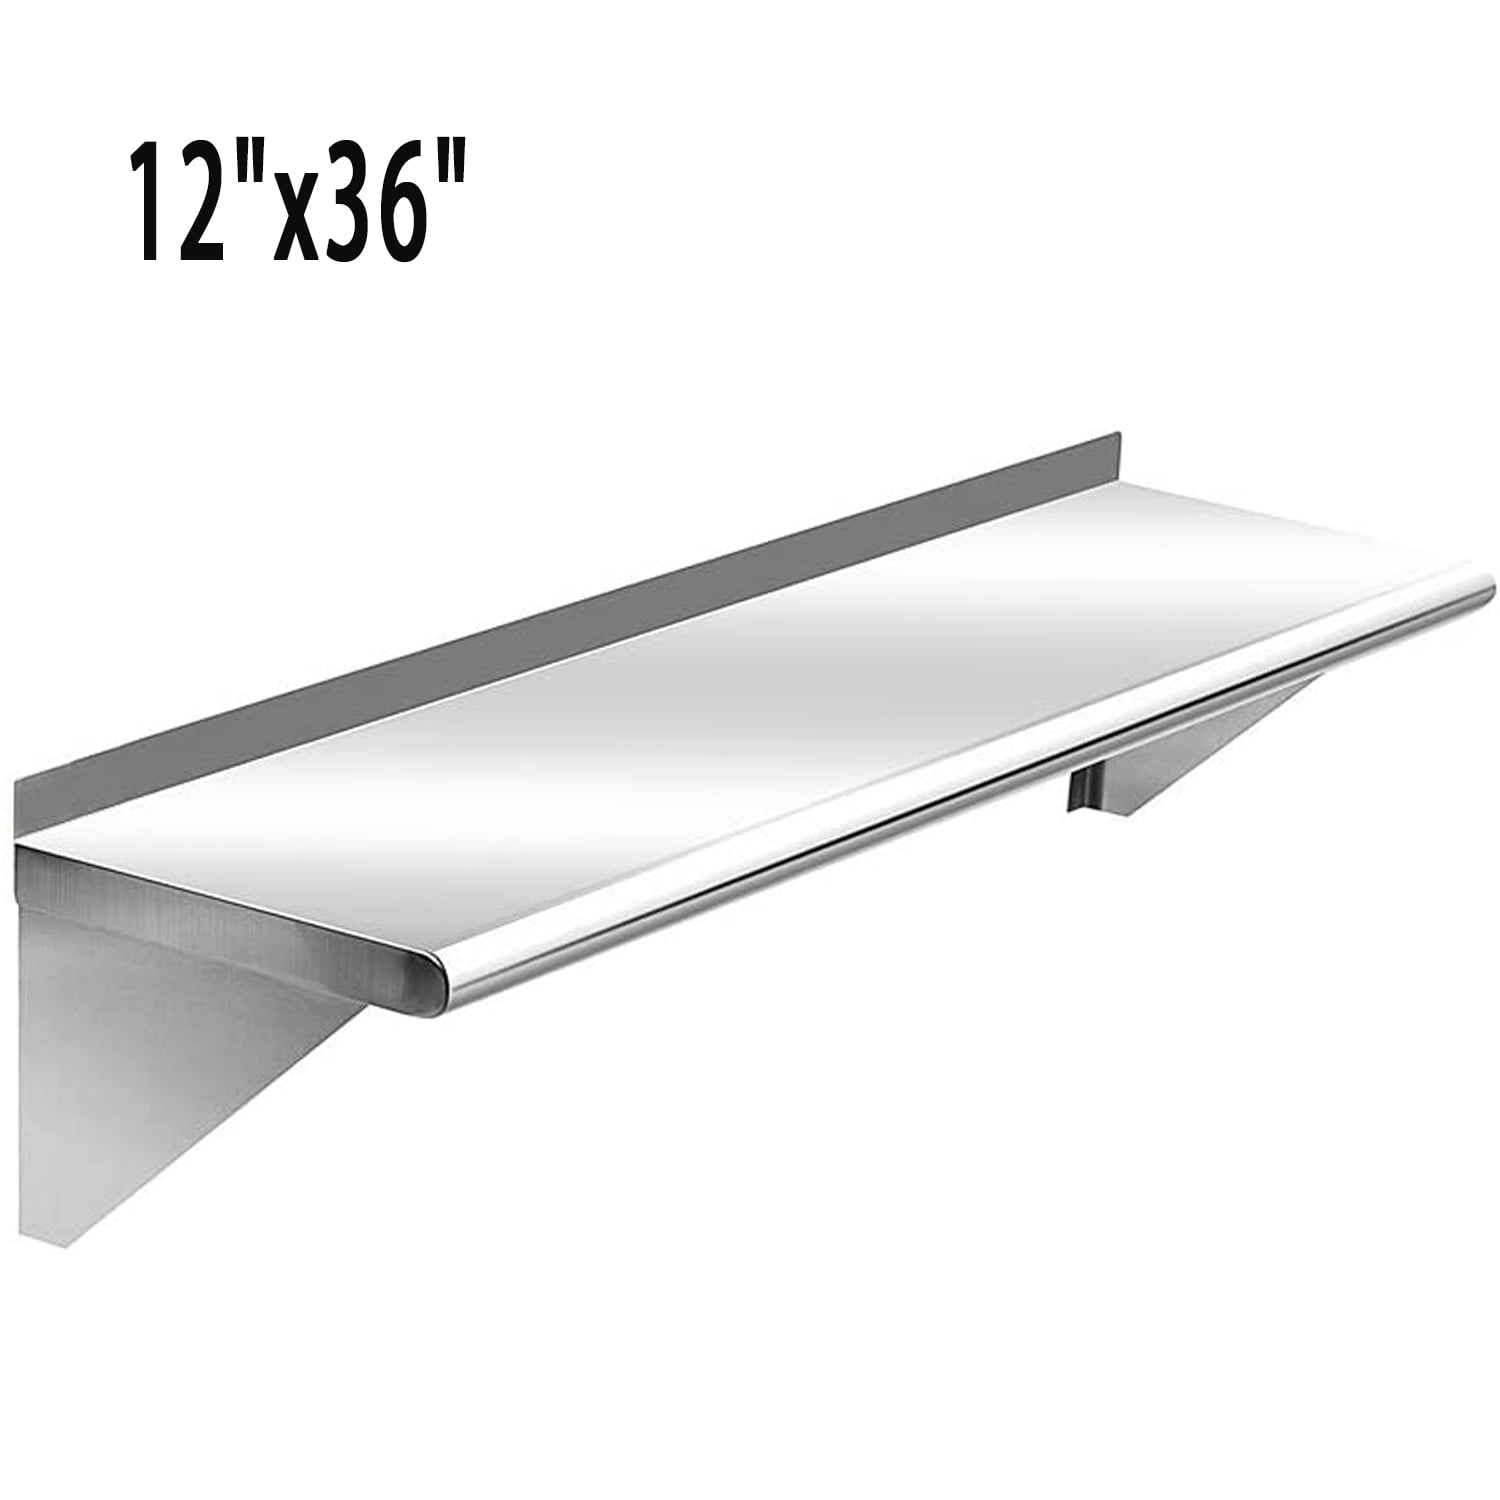 Hally Stainless Steel Shelf 12 x 24 Inches 230 lb, NSF Commercial Wall  Mount Floating Shelving for Restaurant, Kitchen, Home and Hotel